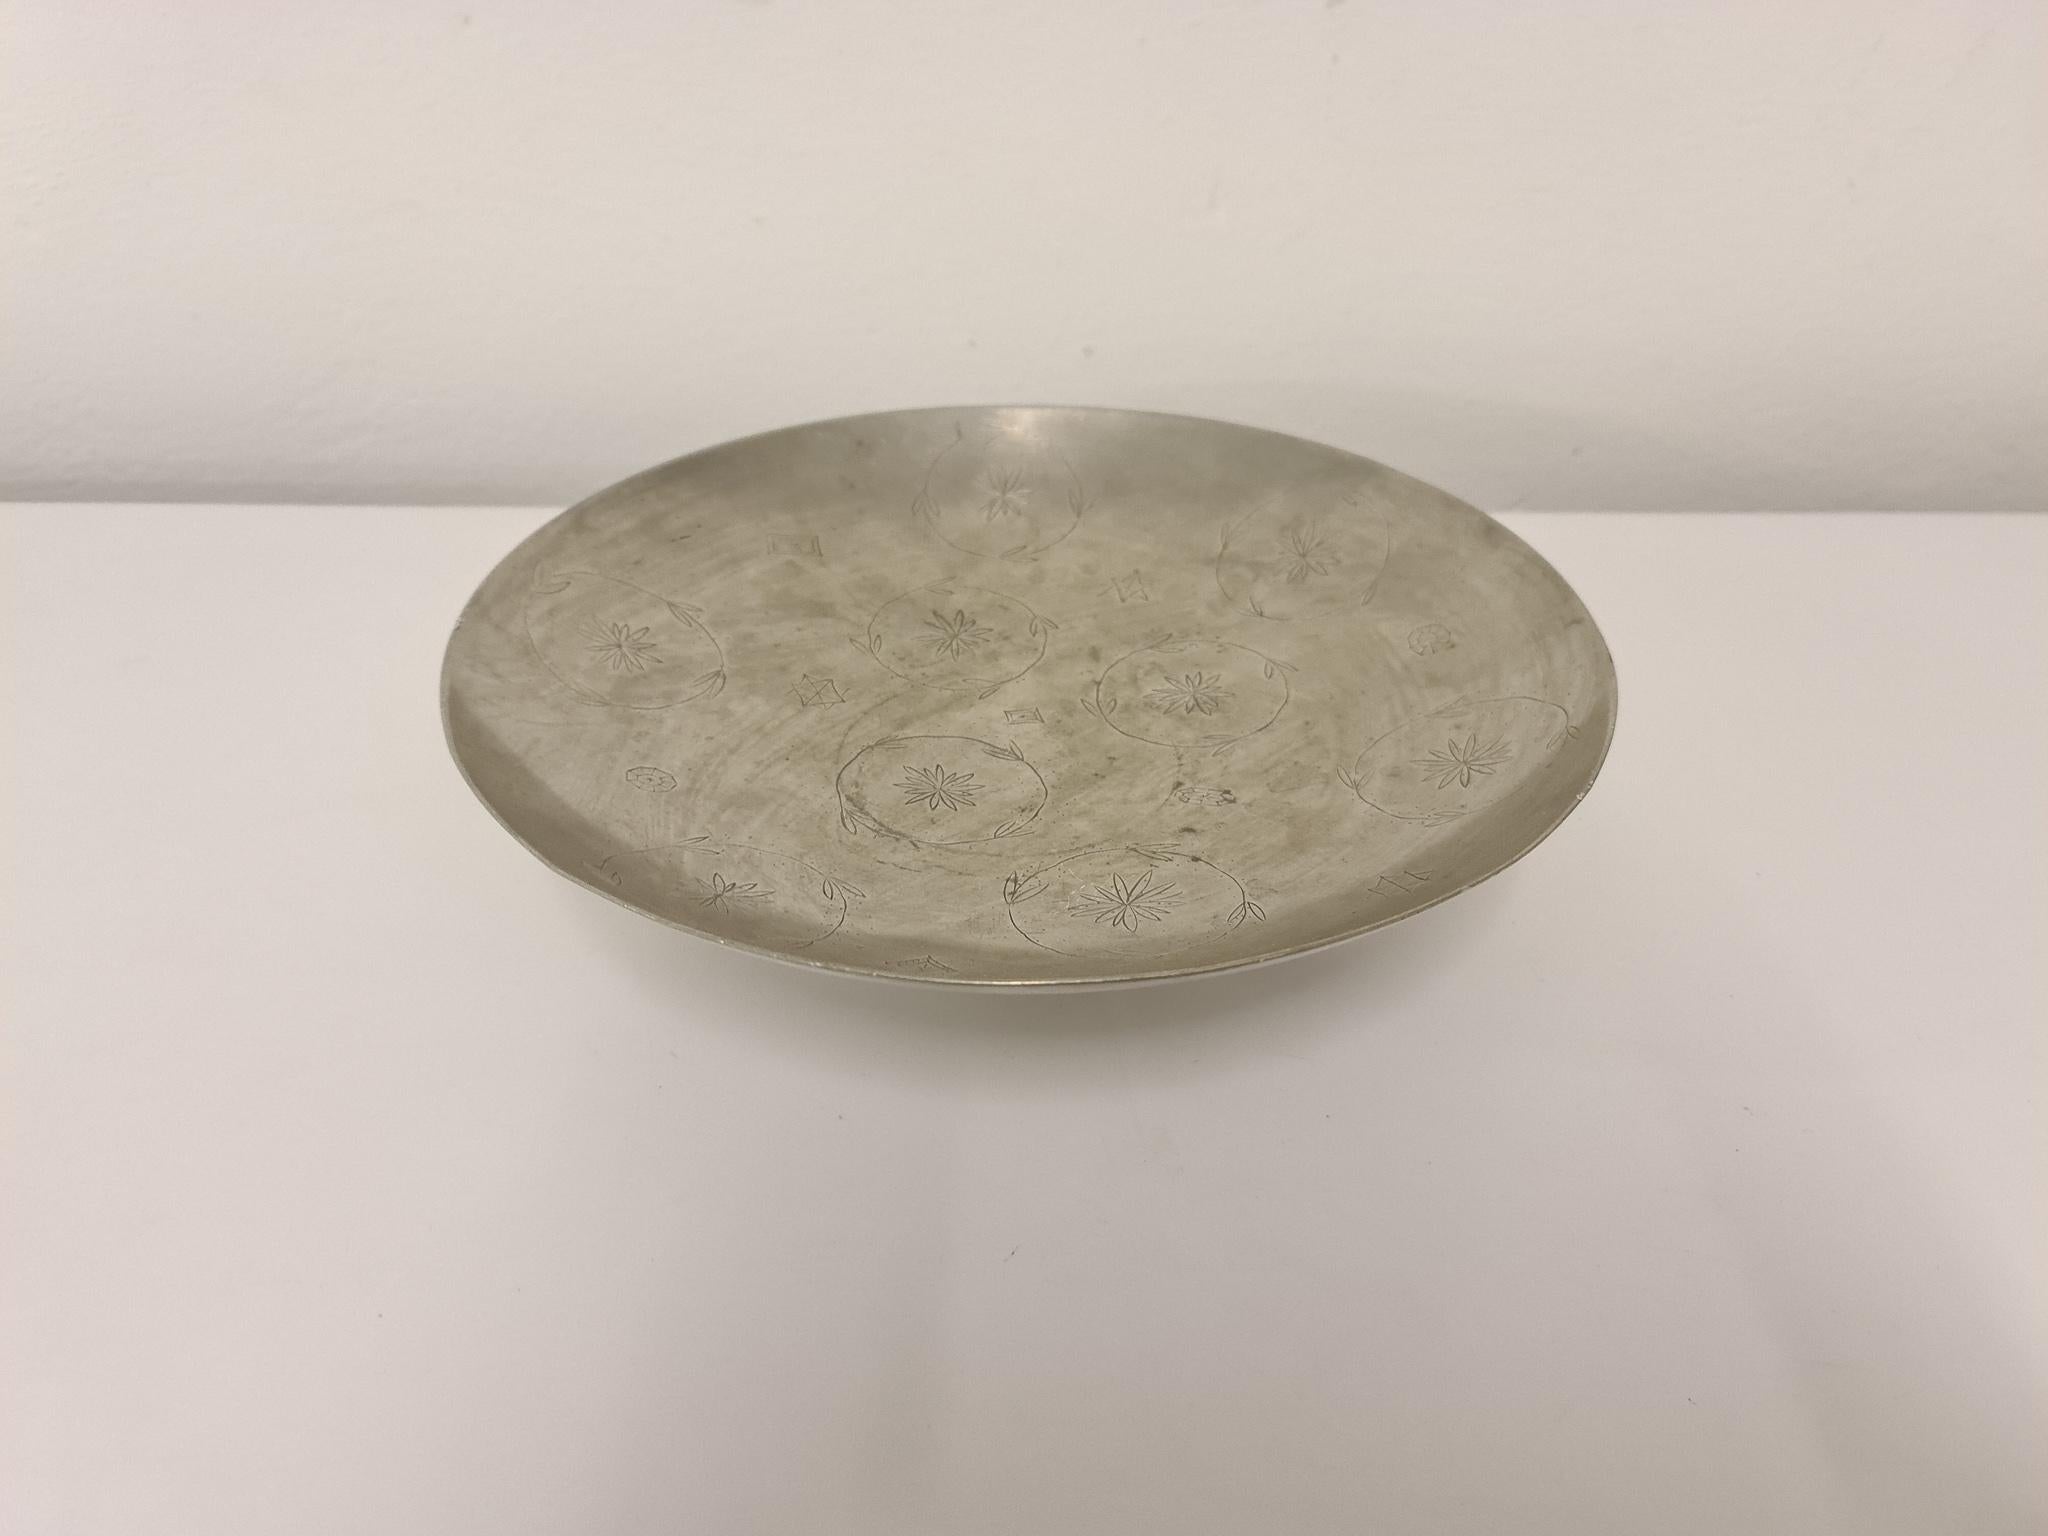 This simple but so graceful pewter bowl on foot was designed by Estrid Ericson who was the founder of famous Svenskt Tenn. The bowl itself has a playful pattern on the top. Made in Stockholm, Sweden, 1932.

Good vintage condition, mark on one of